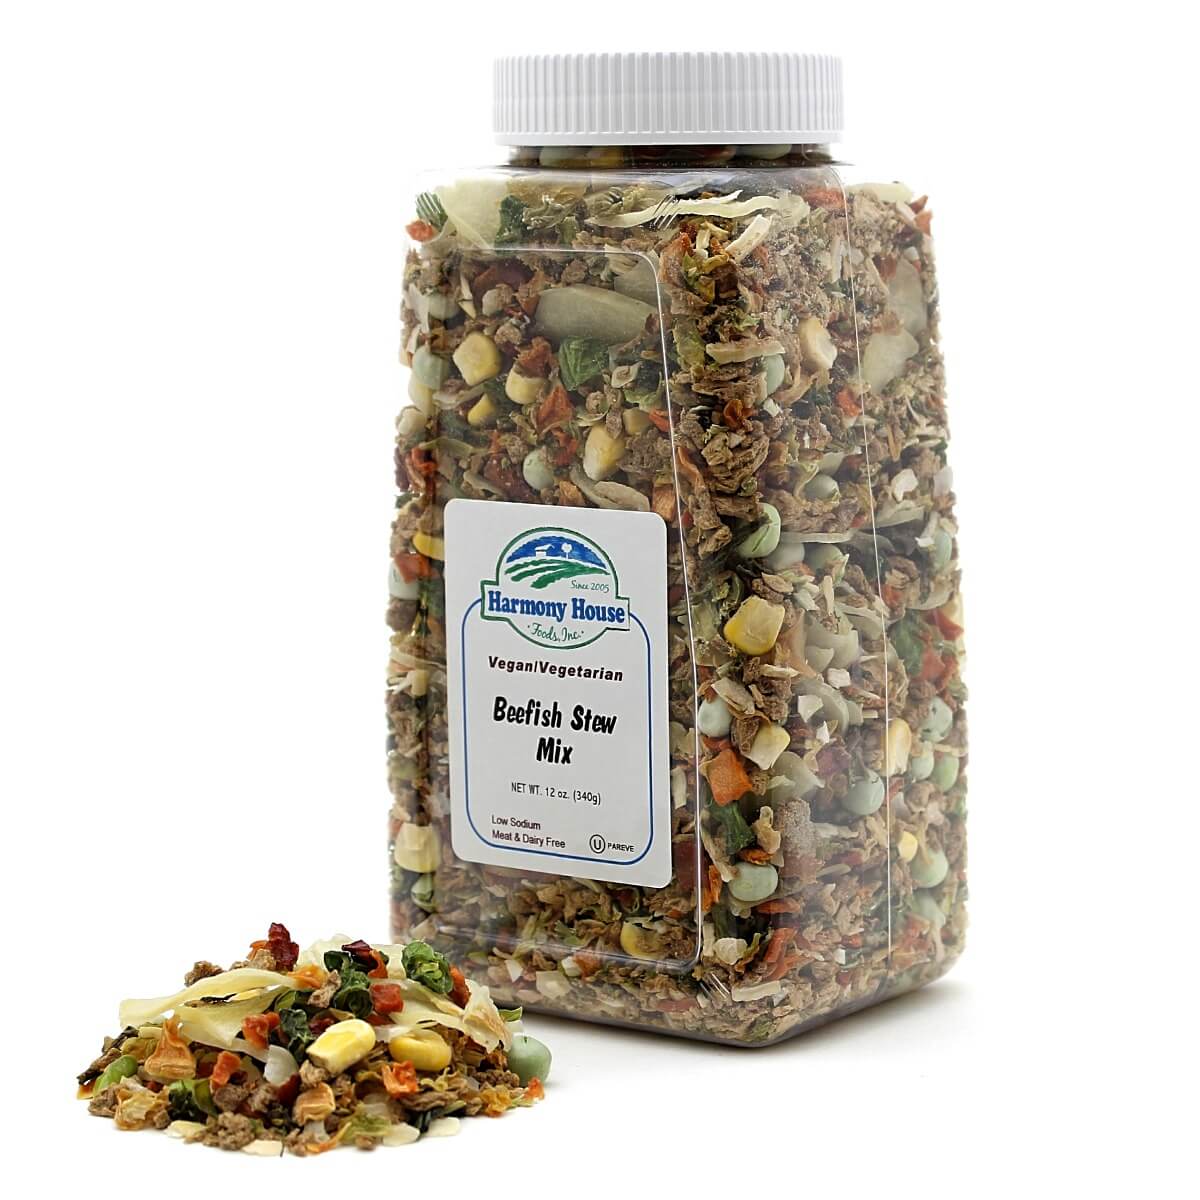 A jar of bird food on a white background, shipped in 1-2 weeks.